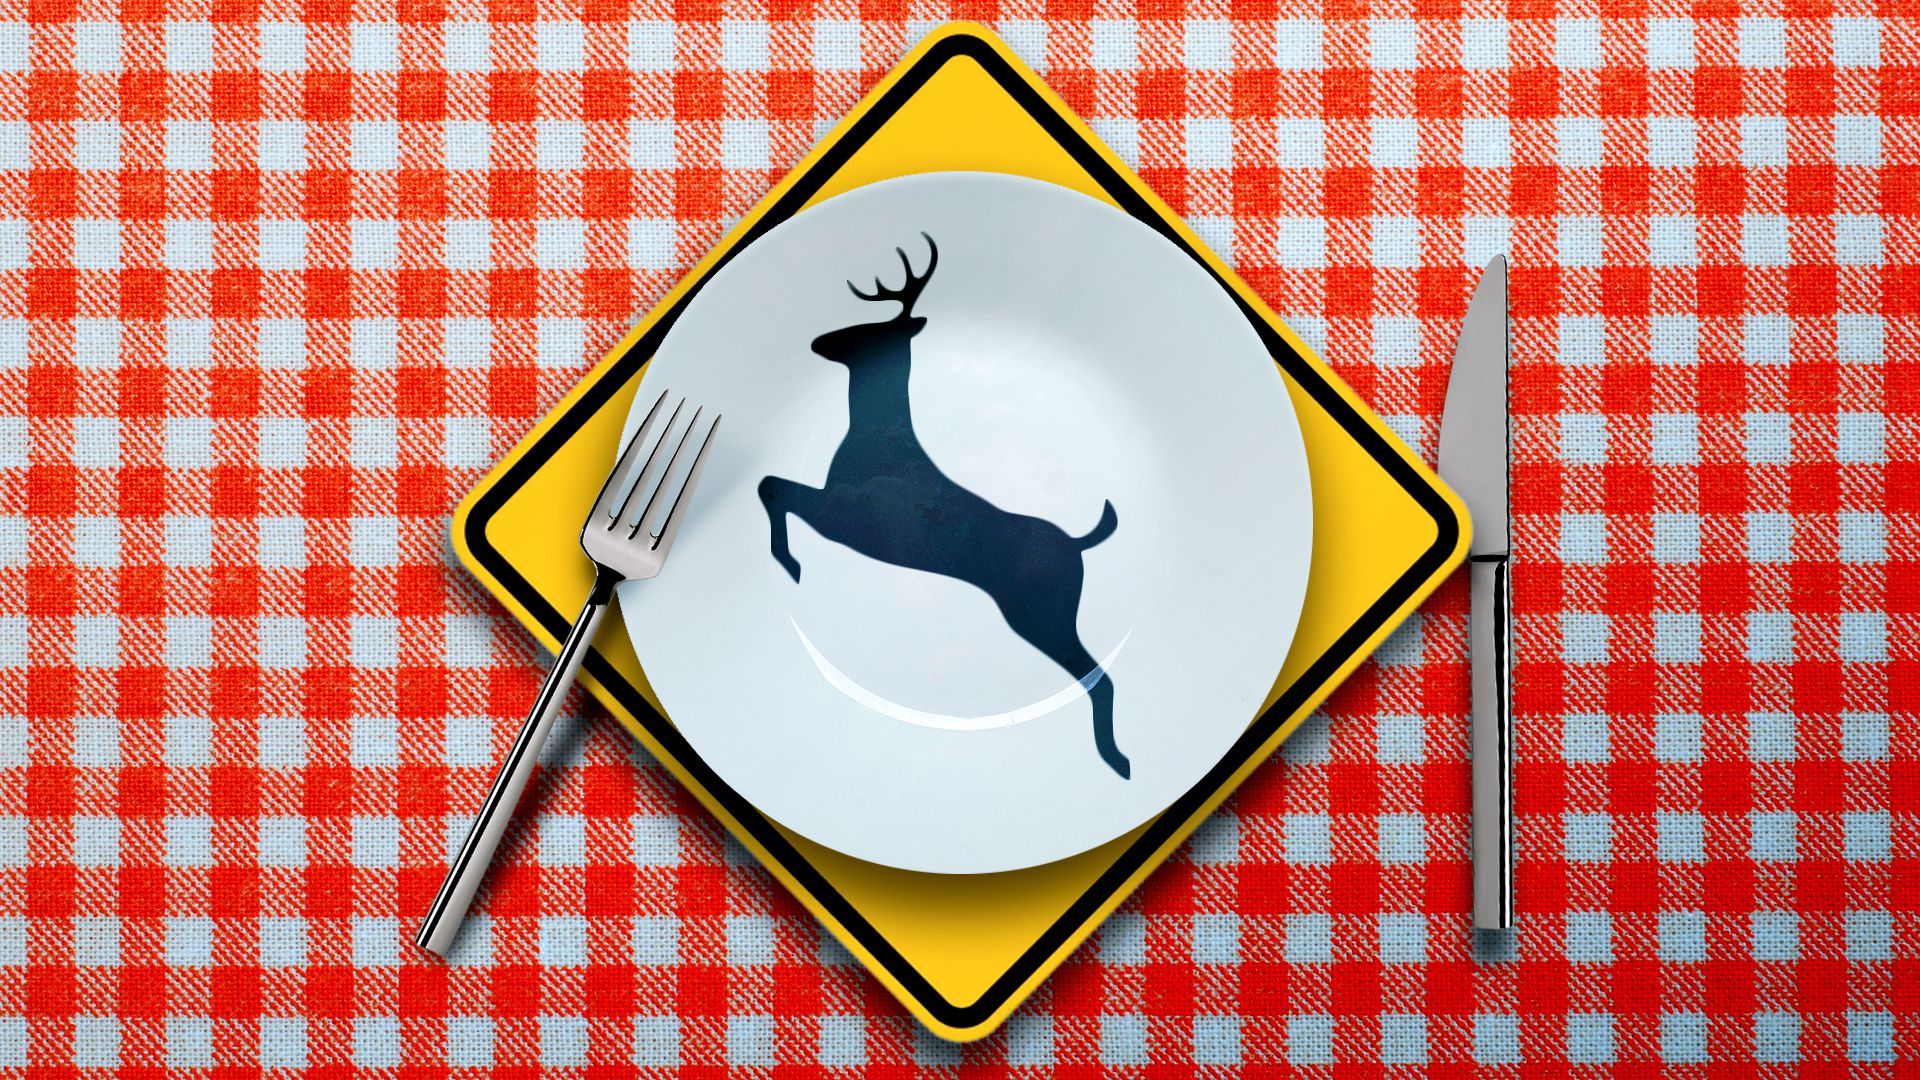 Illustration of a deer crossing road sign laid down like a placemat on a picnic table cloth, under a plate with a deer icon 